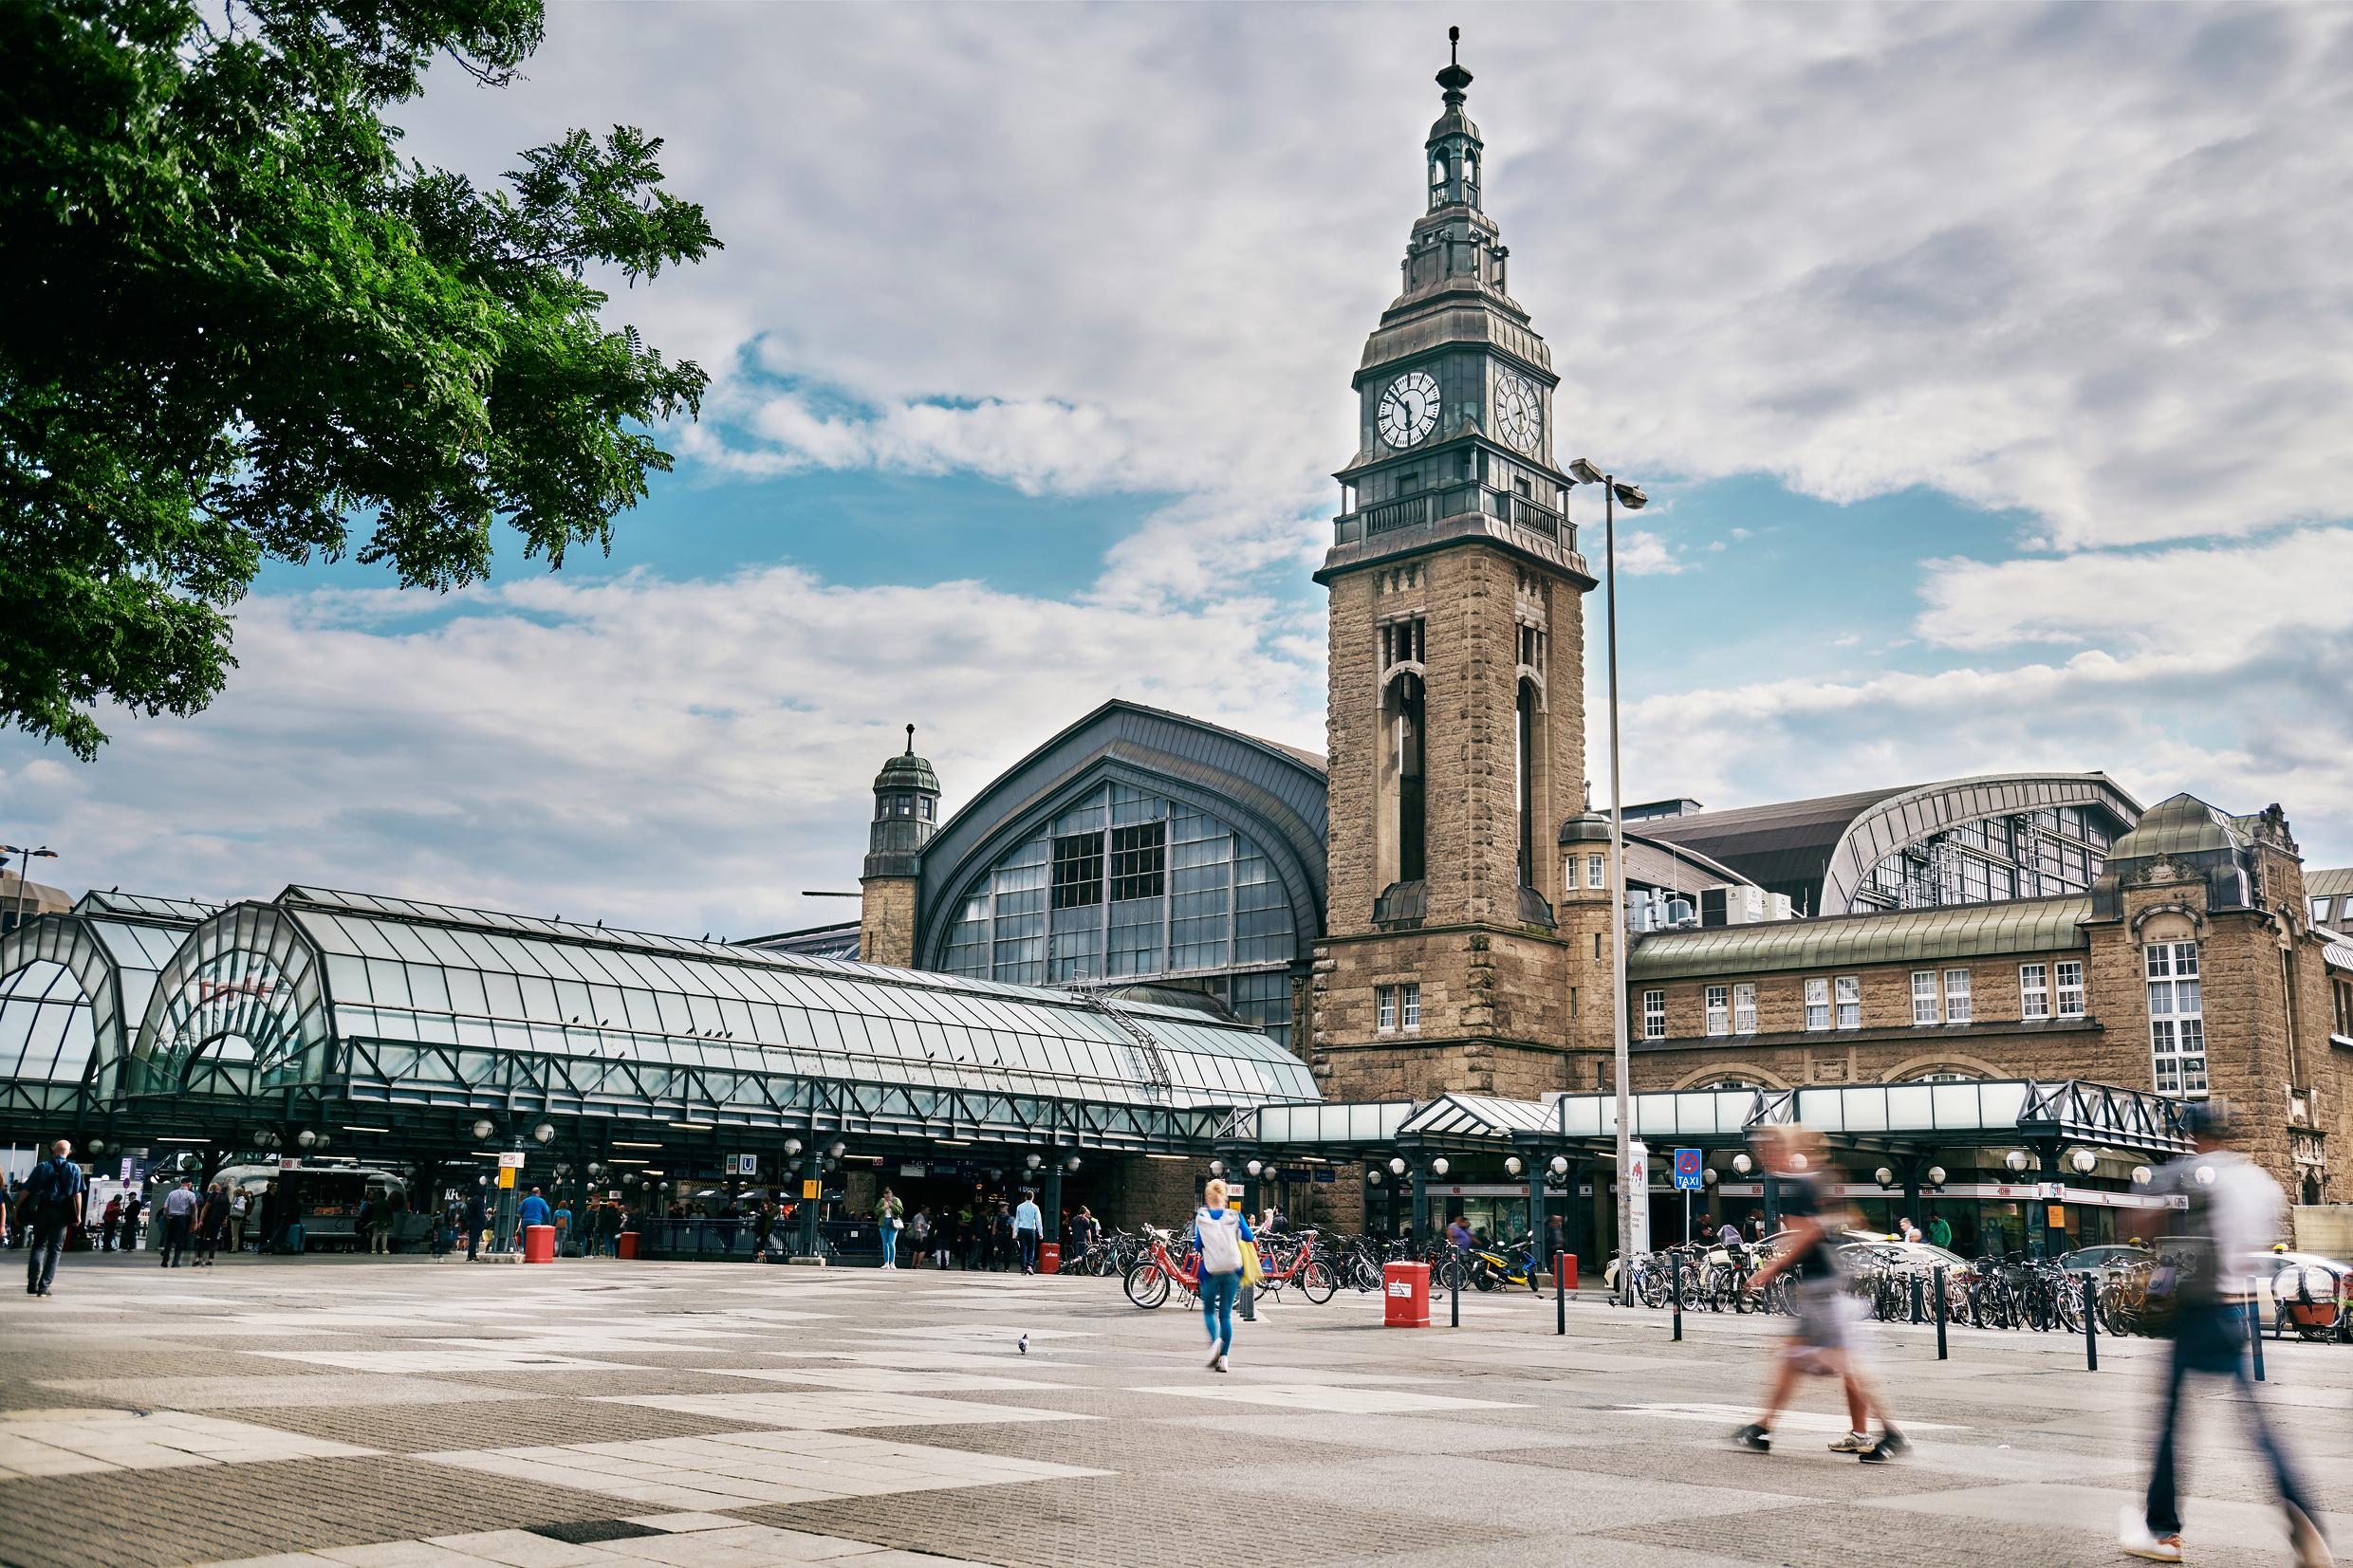 A view of the station building at Hamburg Hauptbahnhof.